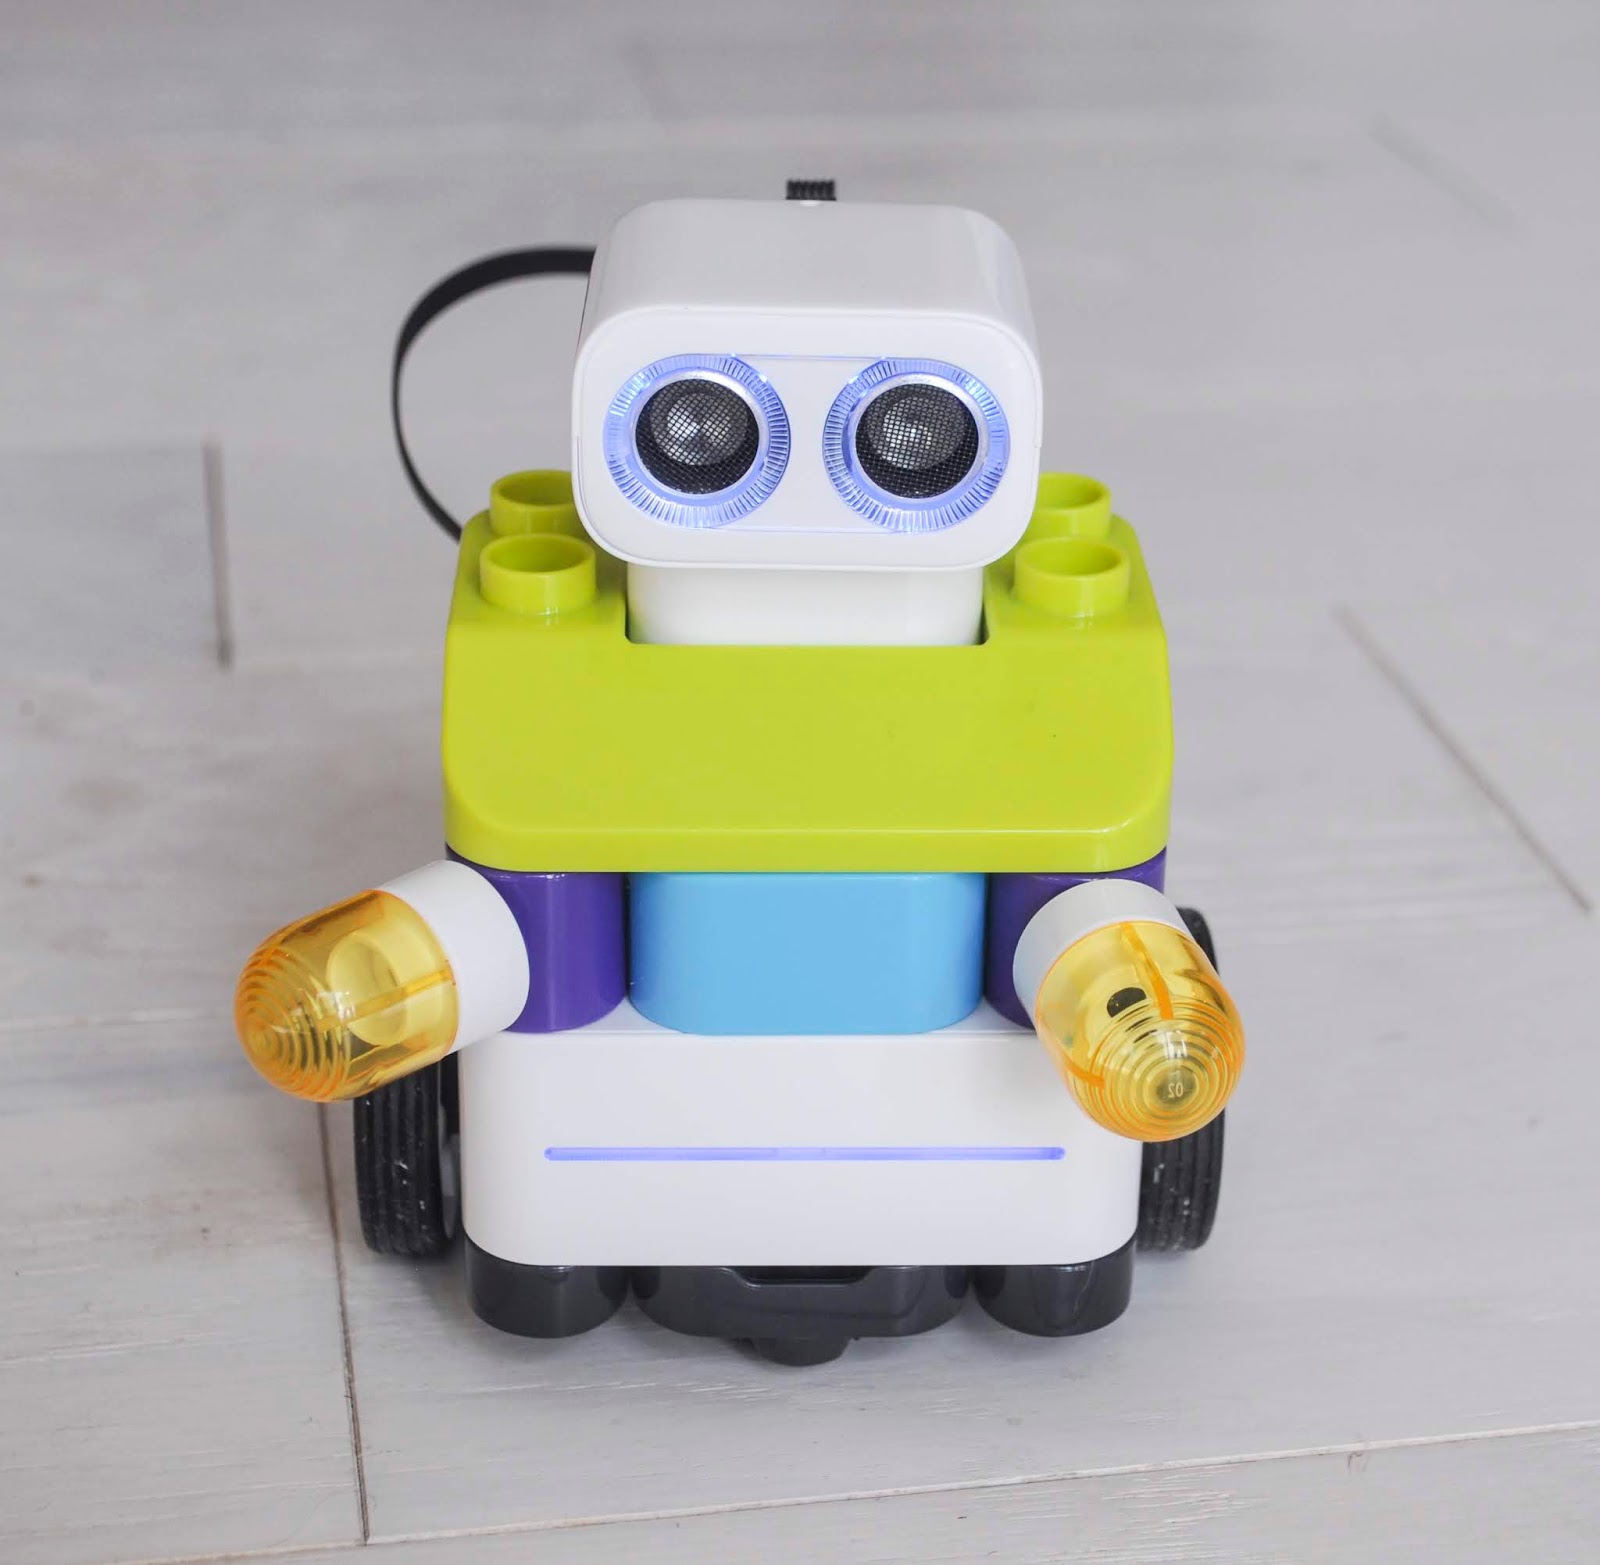 How to Code: BOTZEES Review: Interactive STEM Robot